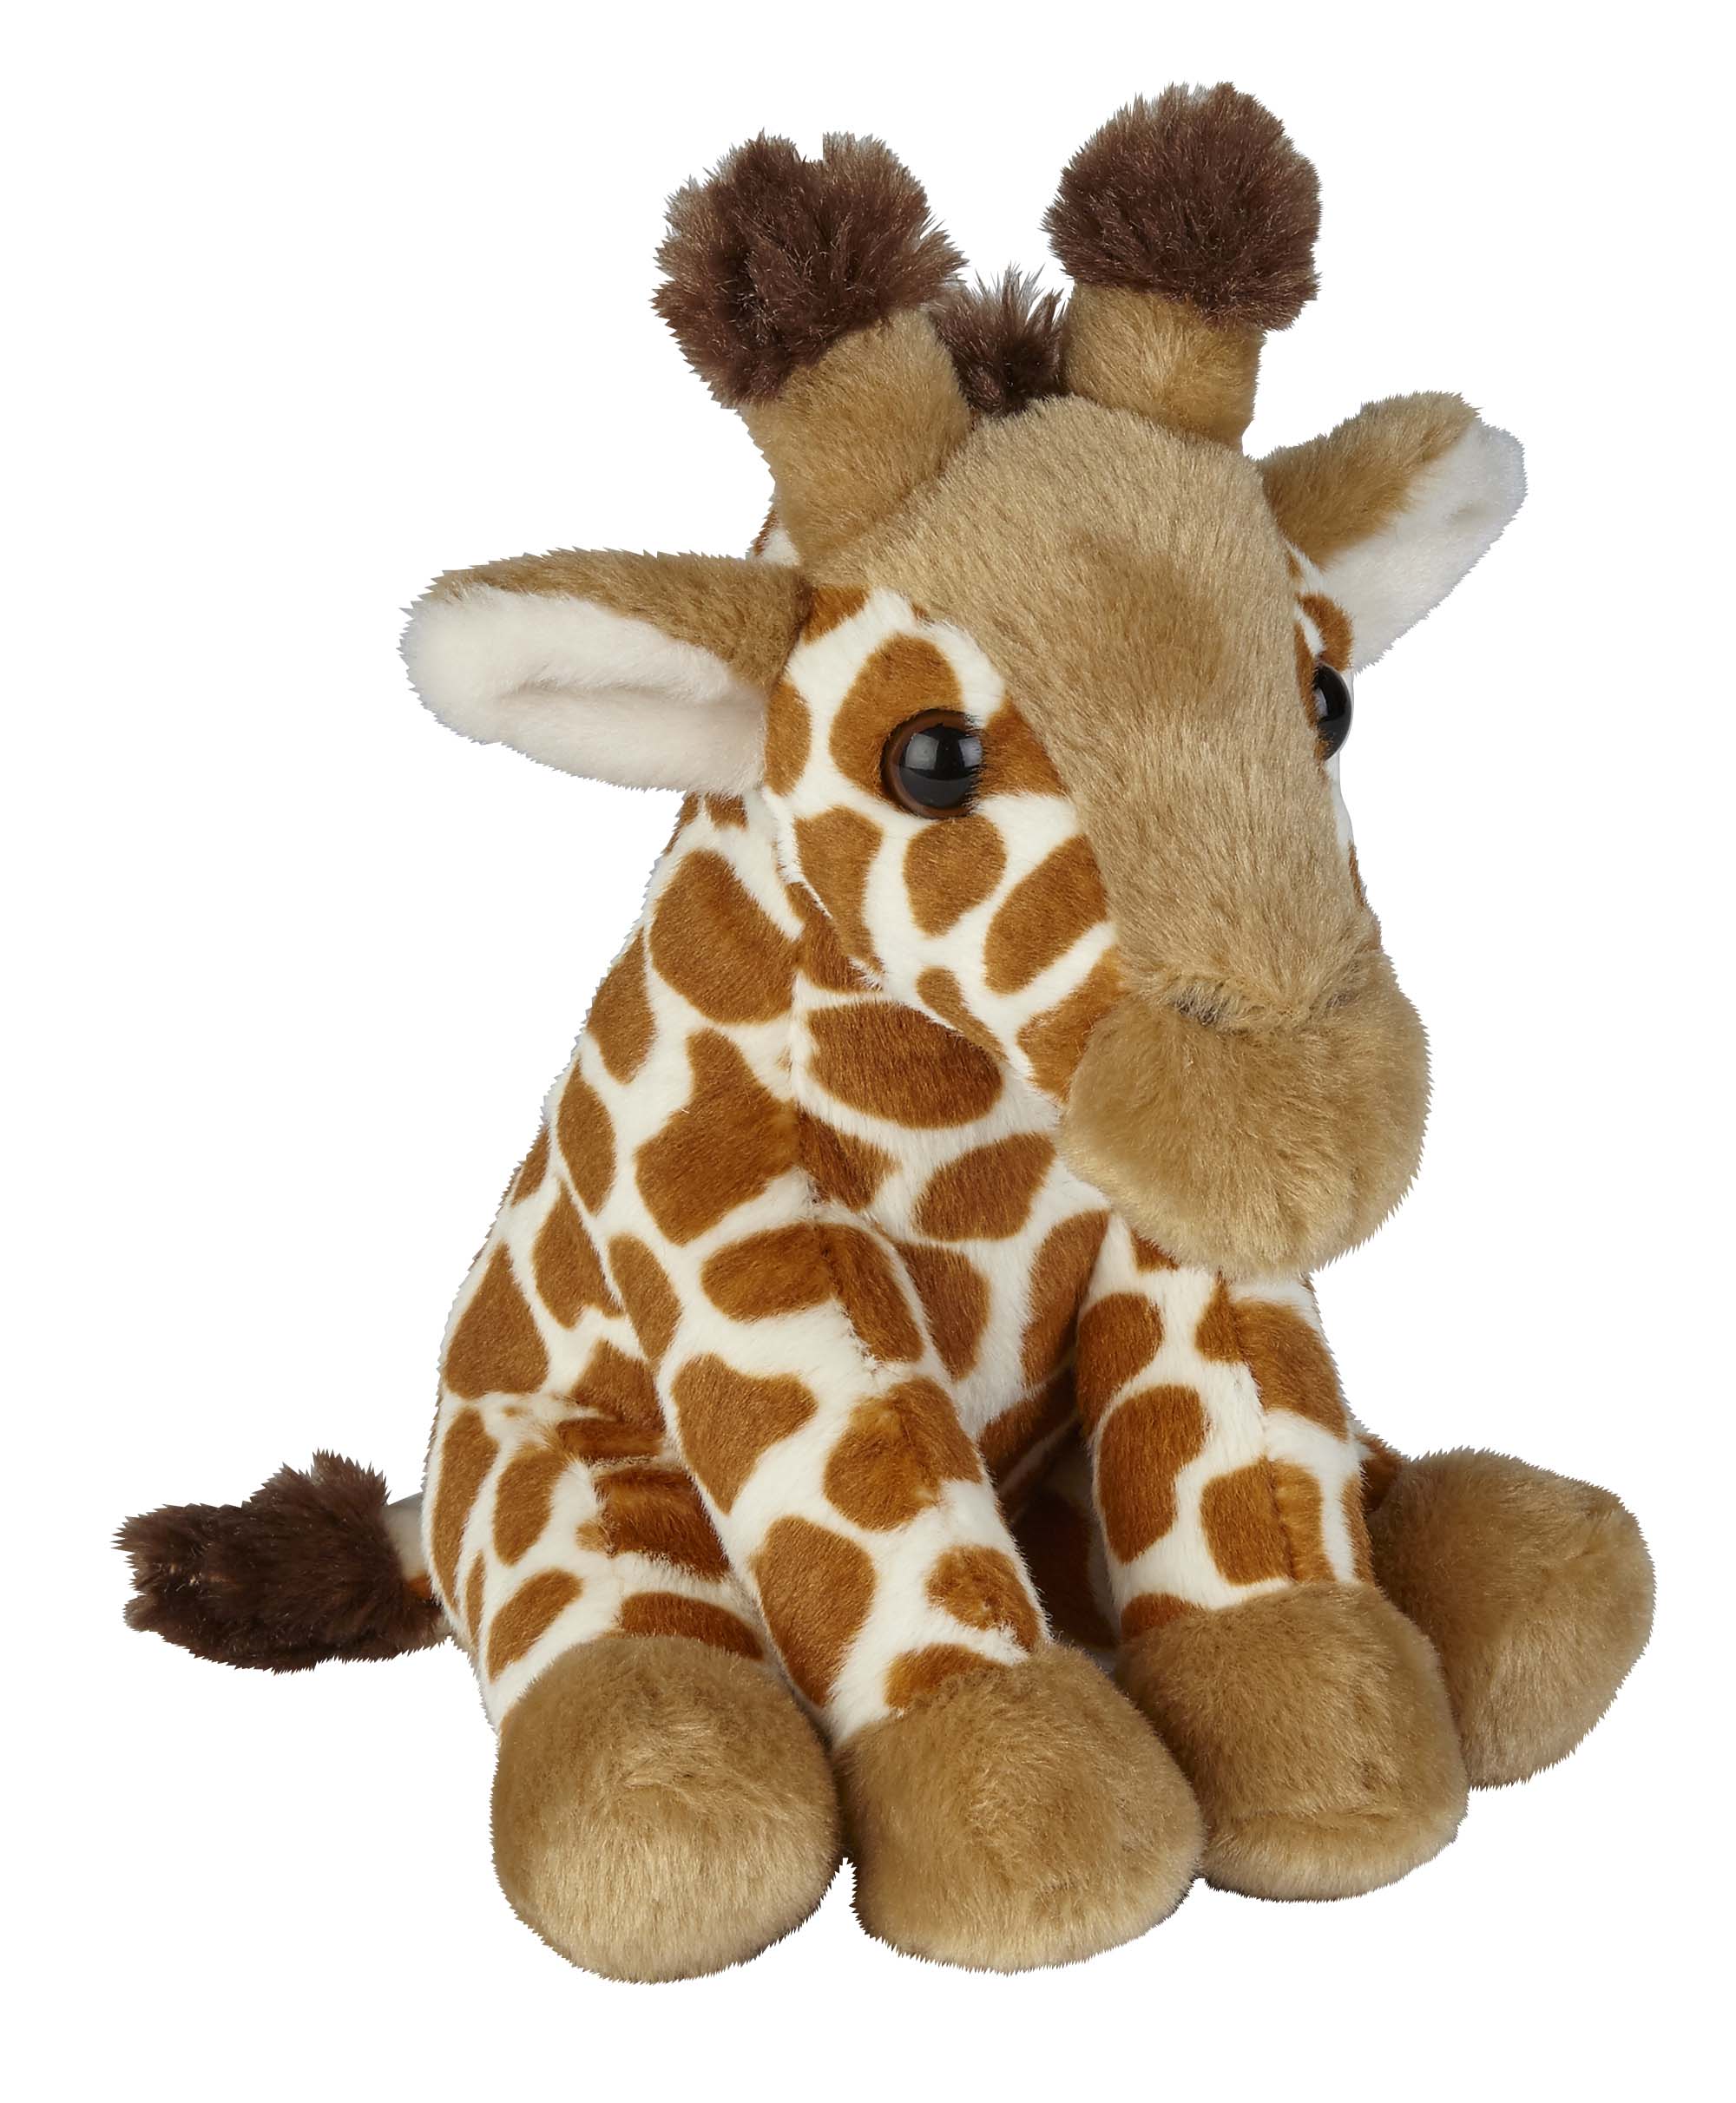 Toy Giraffe For Museums